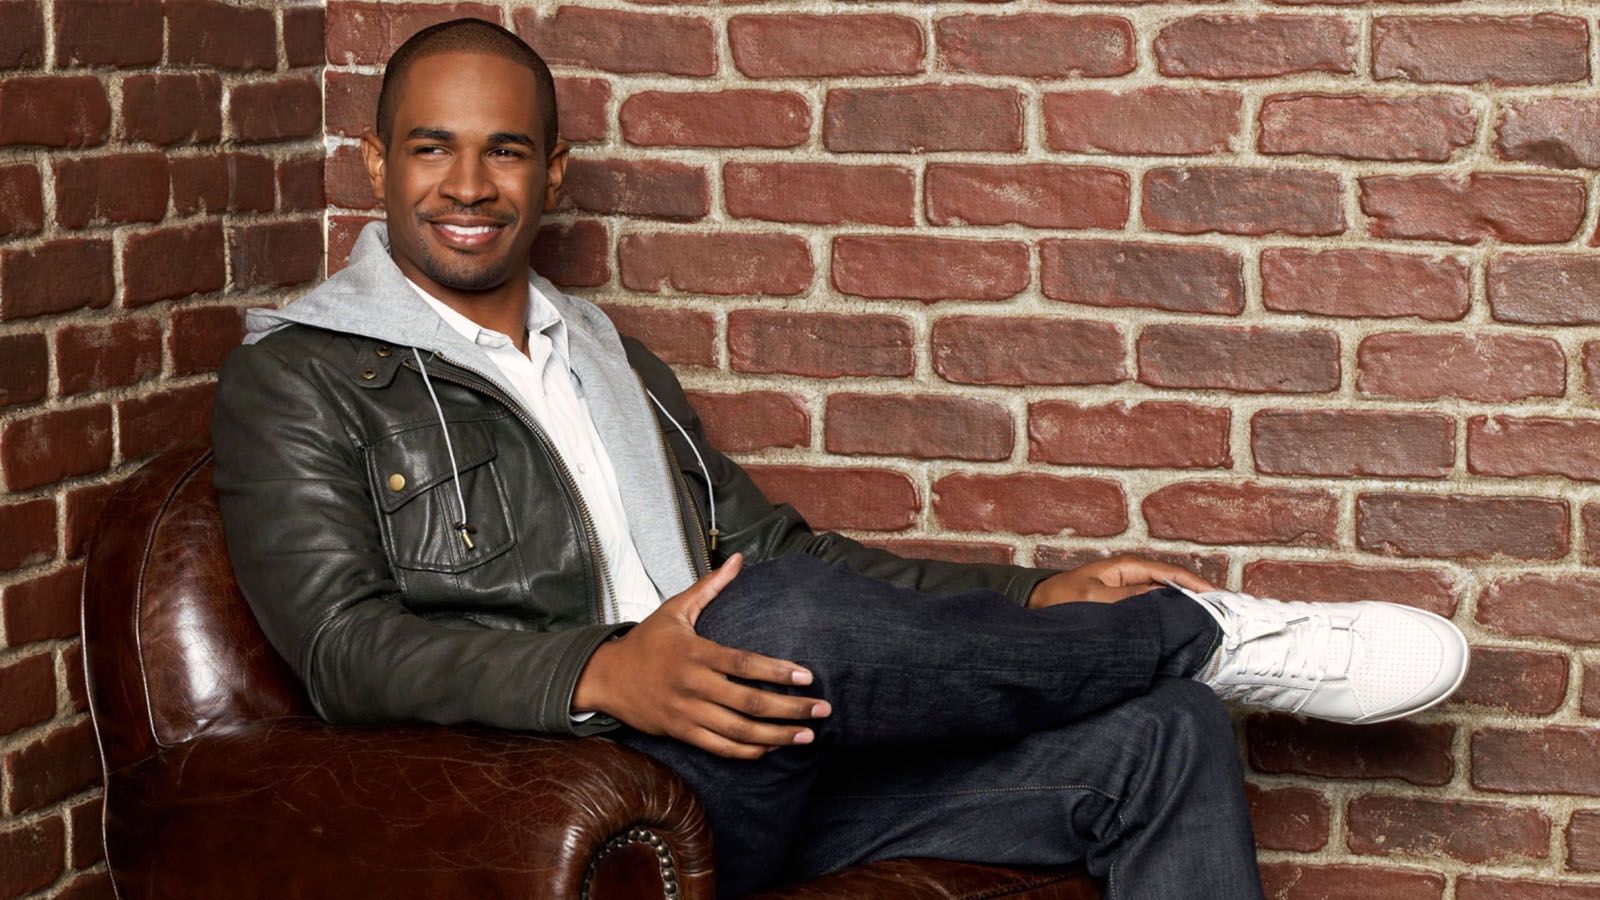 Damon Wayans Jr. will be at Summit City Comedy Club from Oct. 5-7.